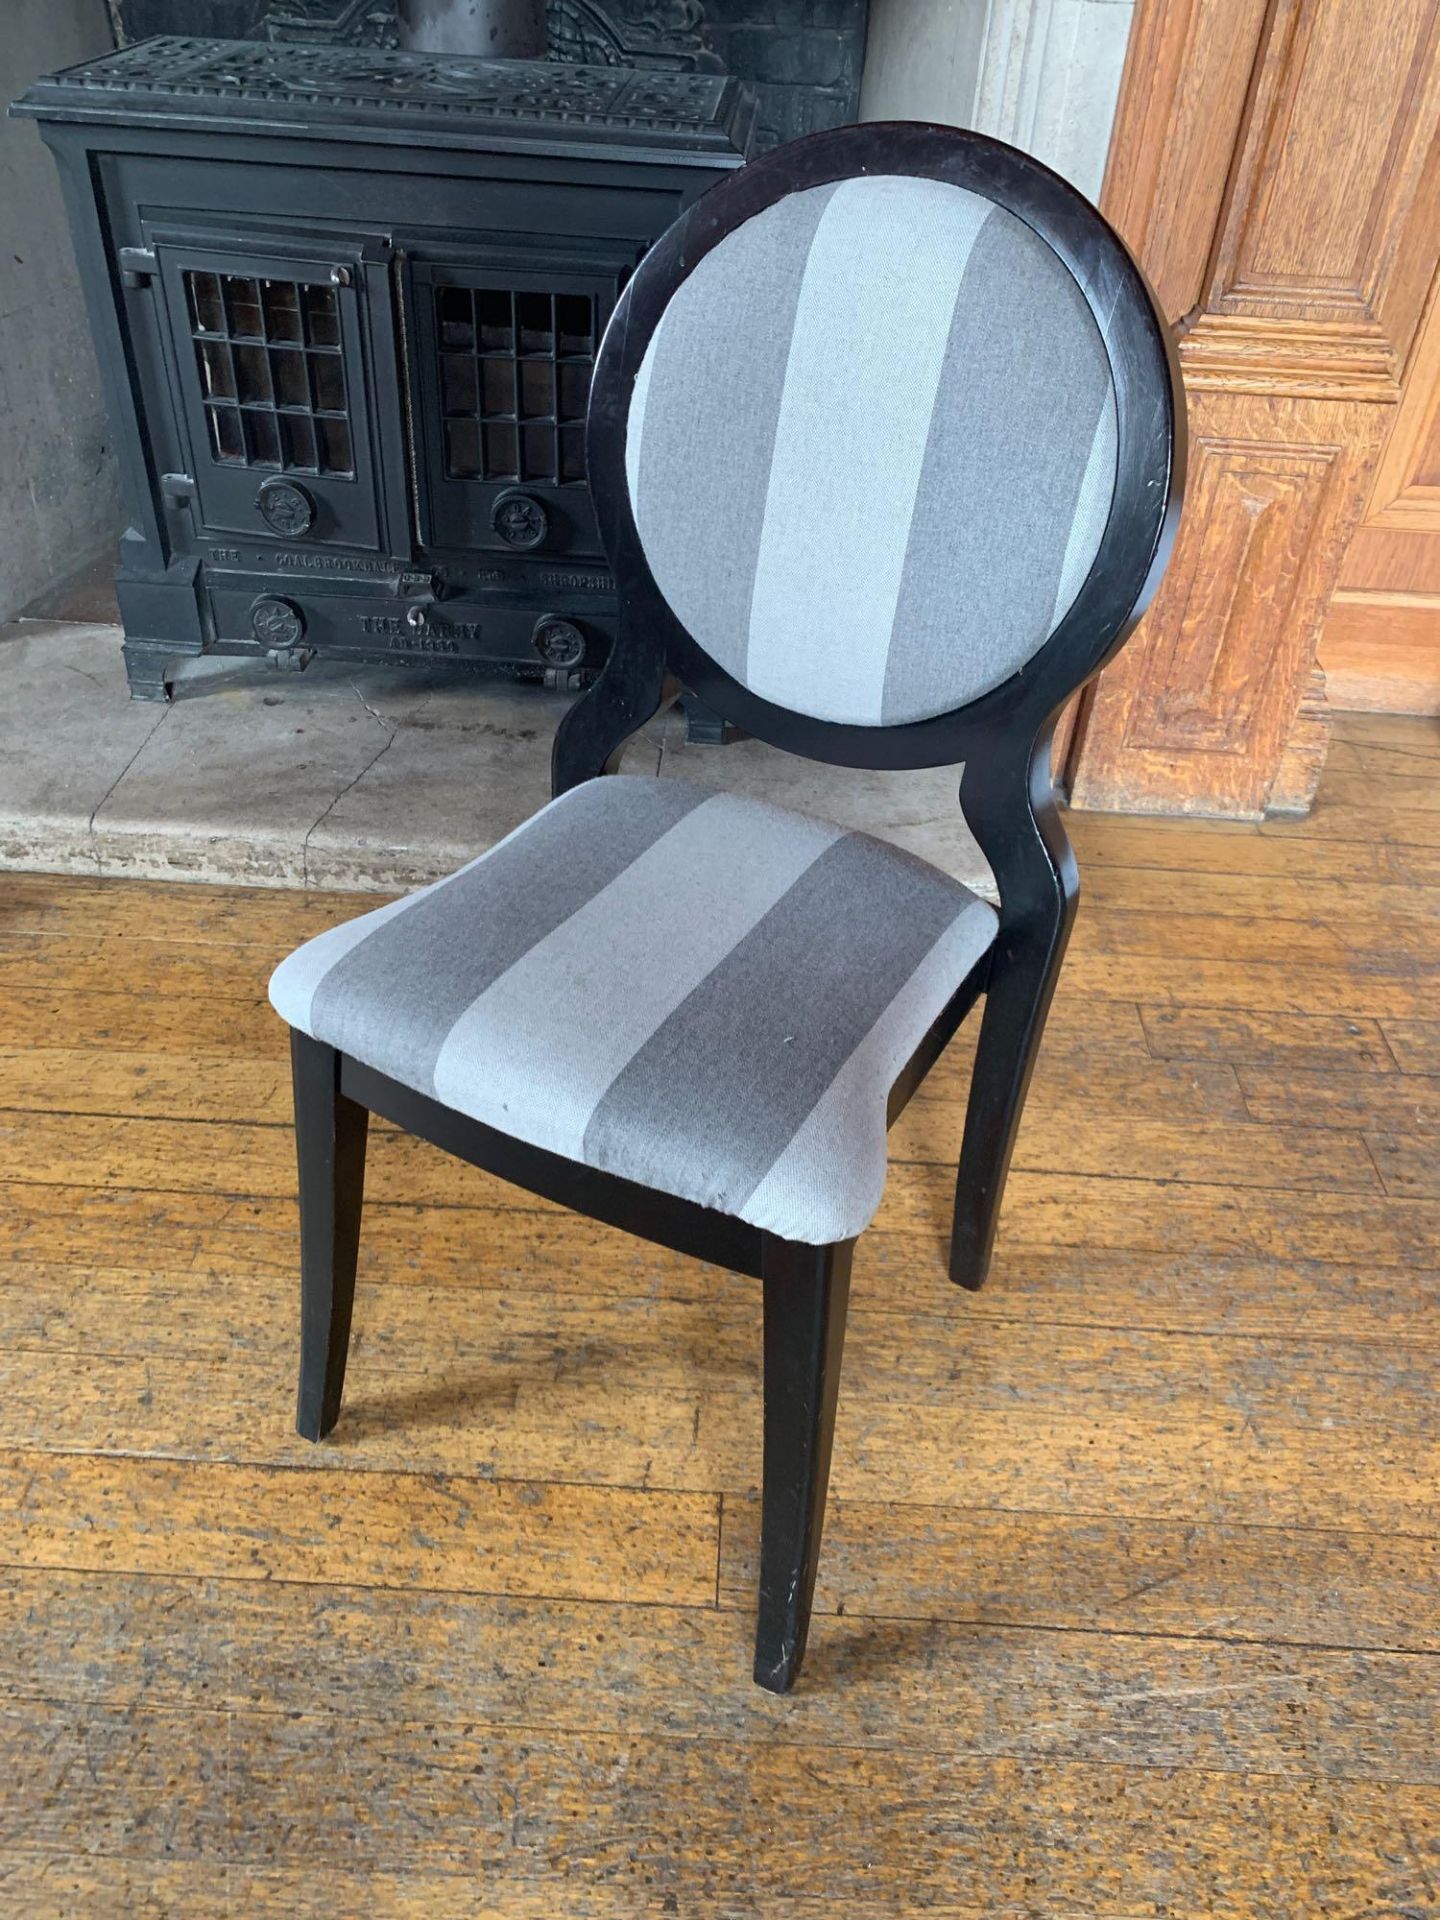 Burgess Furnitures Furniture Round Back Grey Striped Banquet Chairs x 10 95 x 43 x 98cm - Image 2 of 2